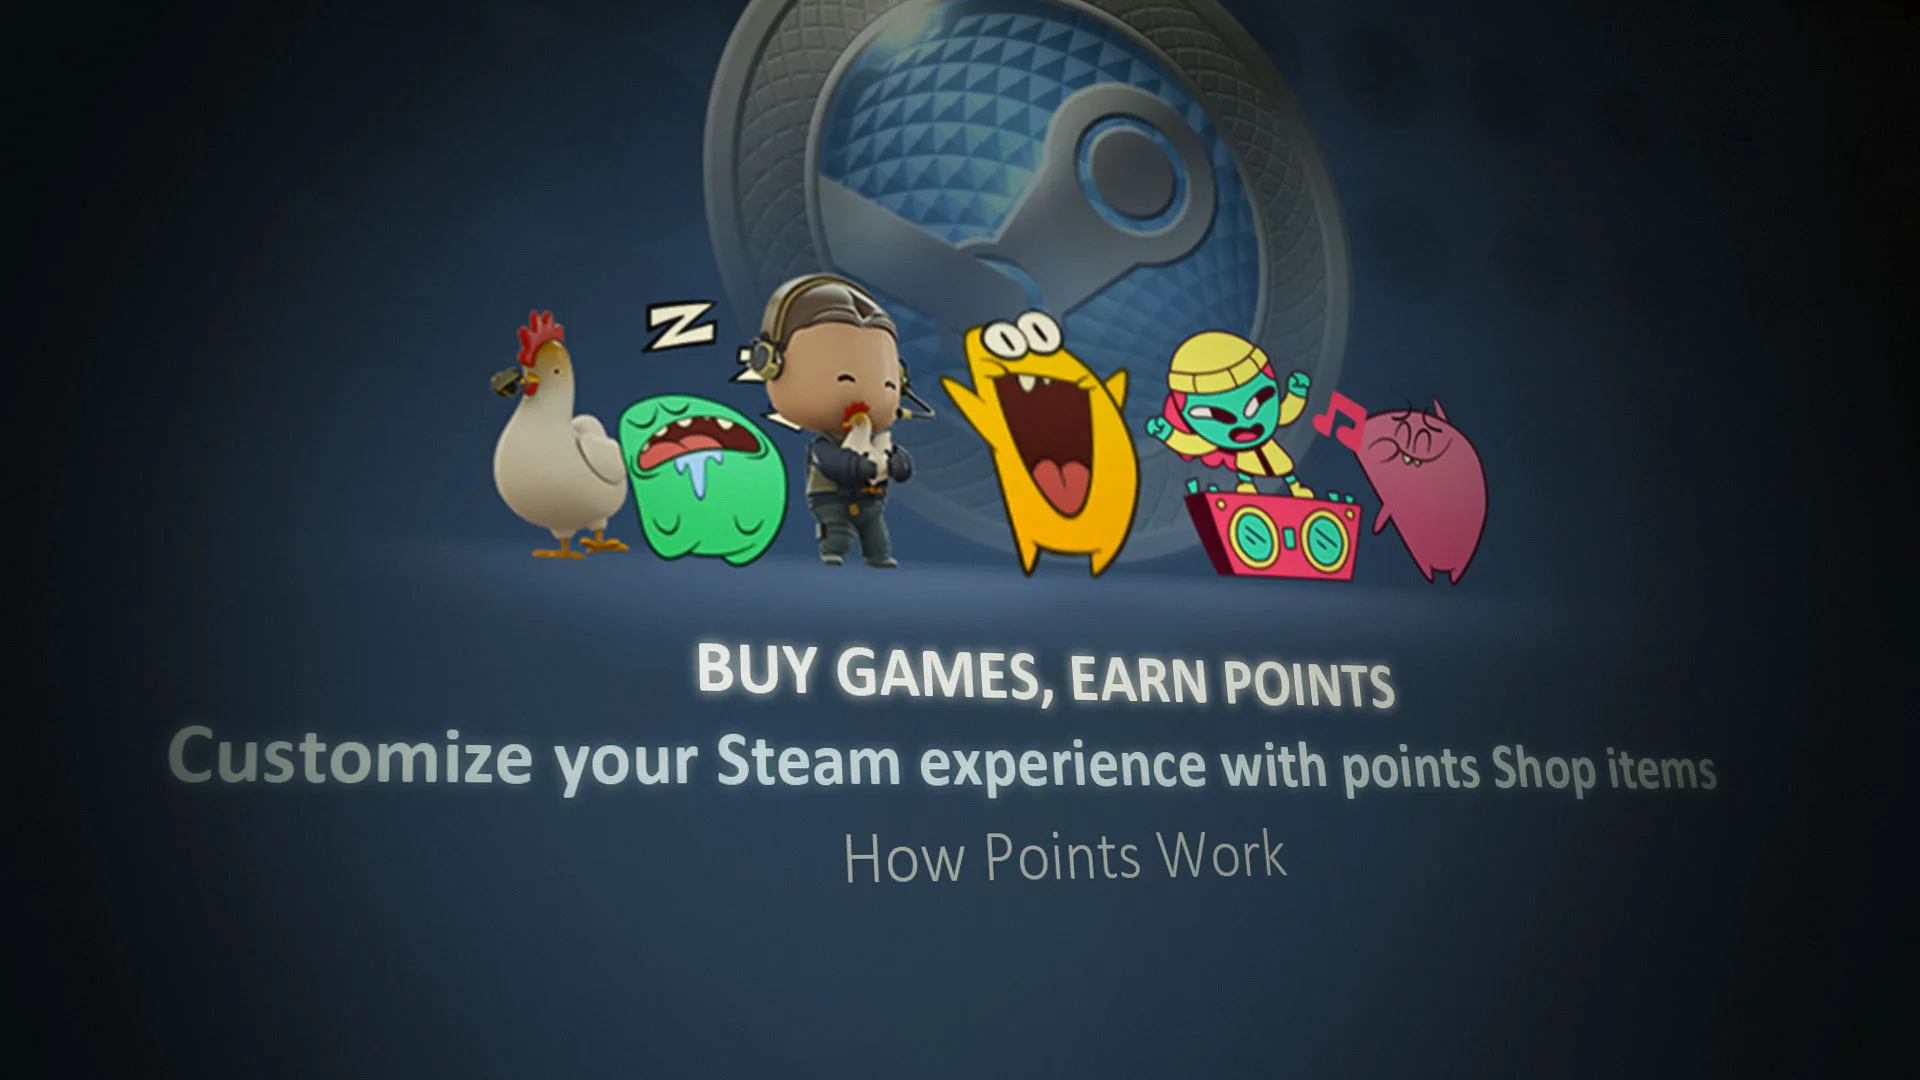 Give you 5000 steam points for 10 dollars by Steamstore